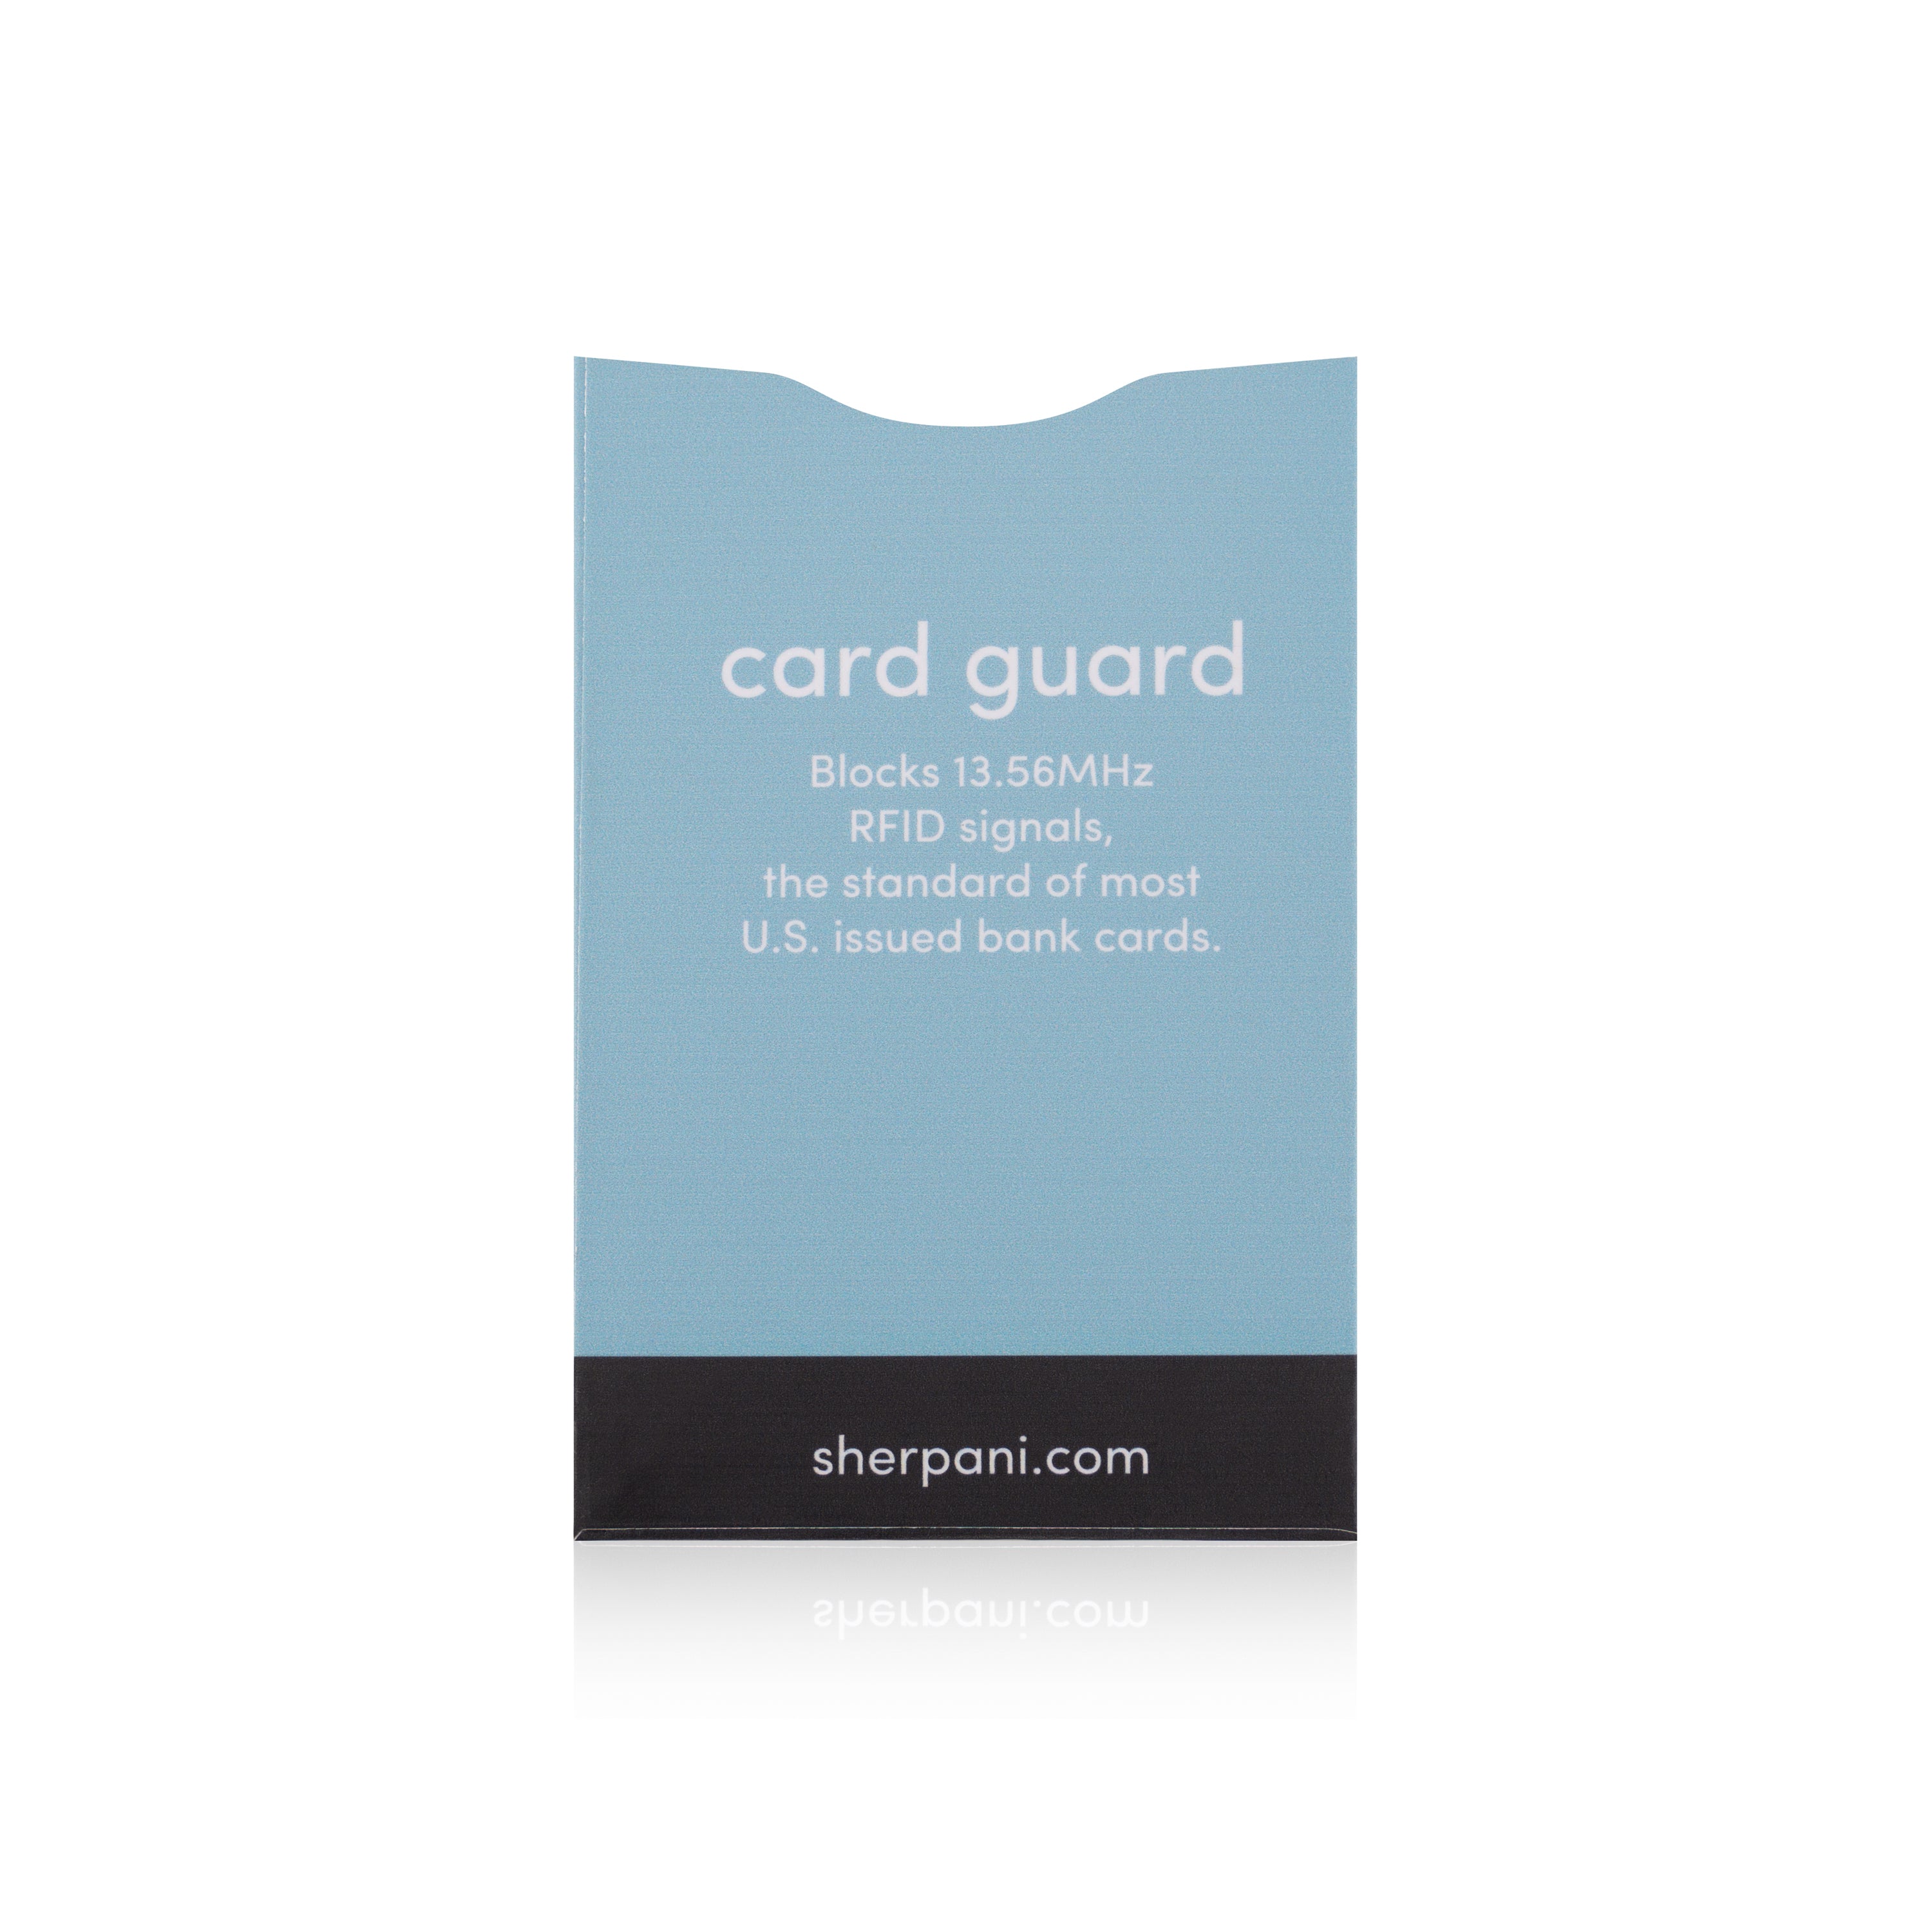 Back view of card guard in Maui Blue. The back reads "Blocks 13.56MHz RFID signals, the standard of most U.S. issued bank cards."